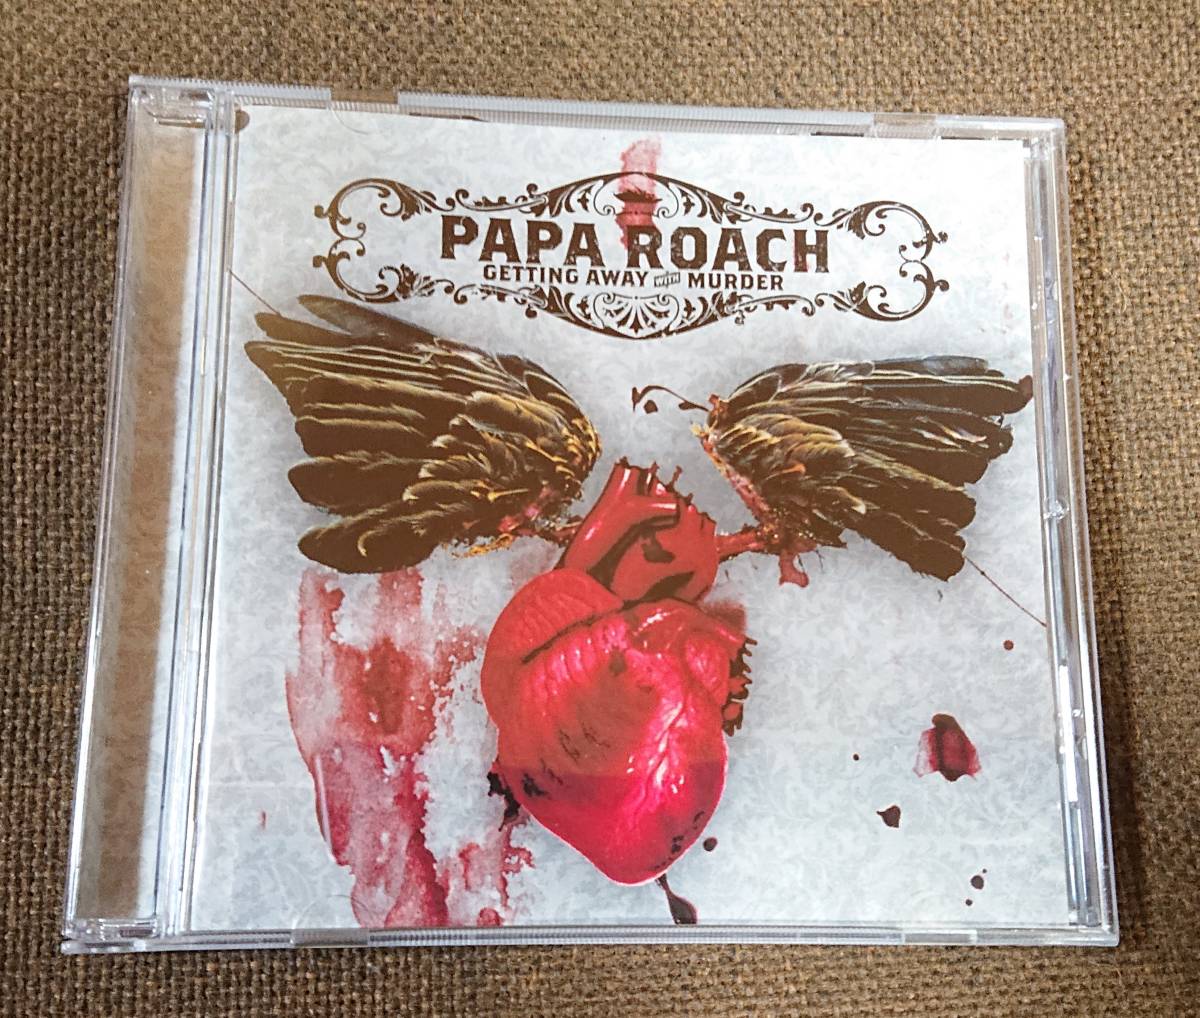 PAPA ROACH GETTING AWAY WITH ローチ 国内盤 パパ 2021年新作 超お買い得 MURDER